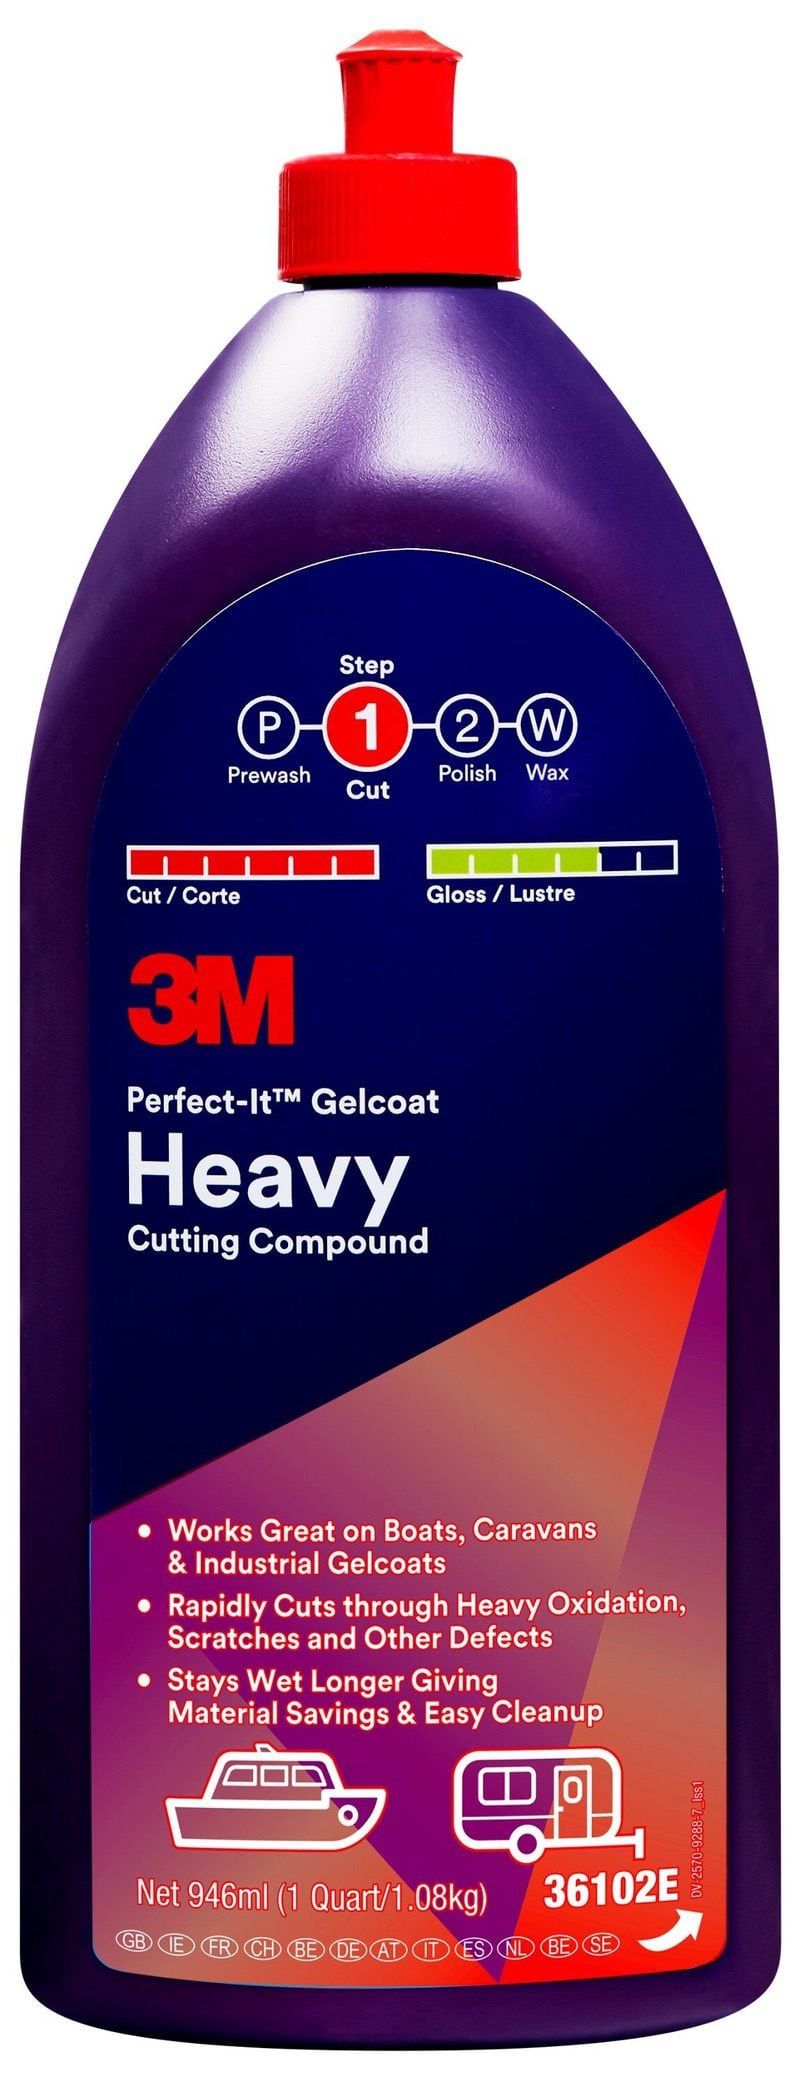 3M™ Perfect-It™ Gelcoat Heavy Cutting Compound, 946 ml, 36102E